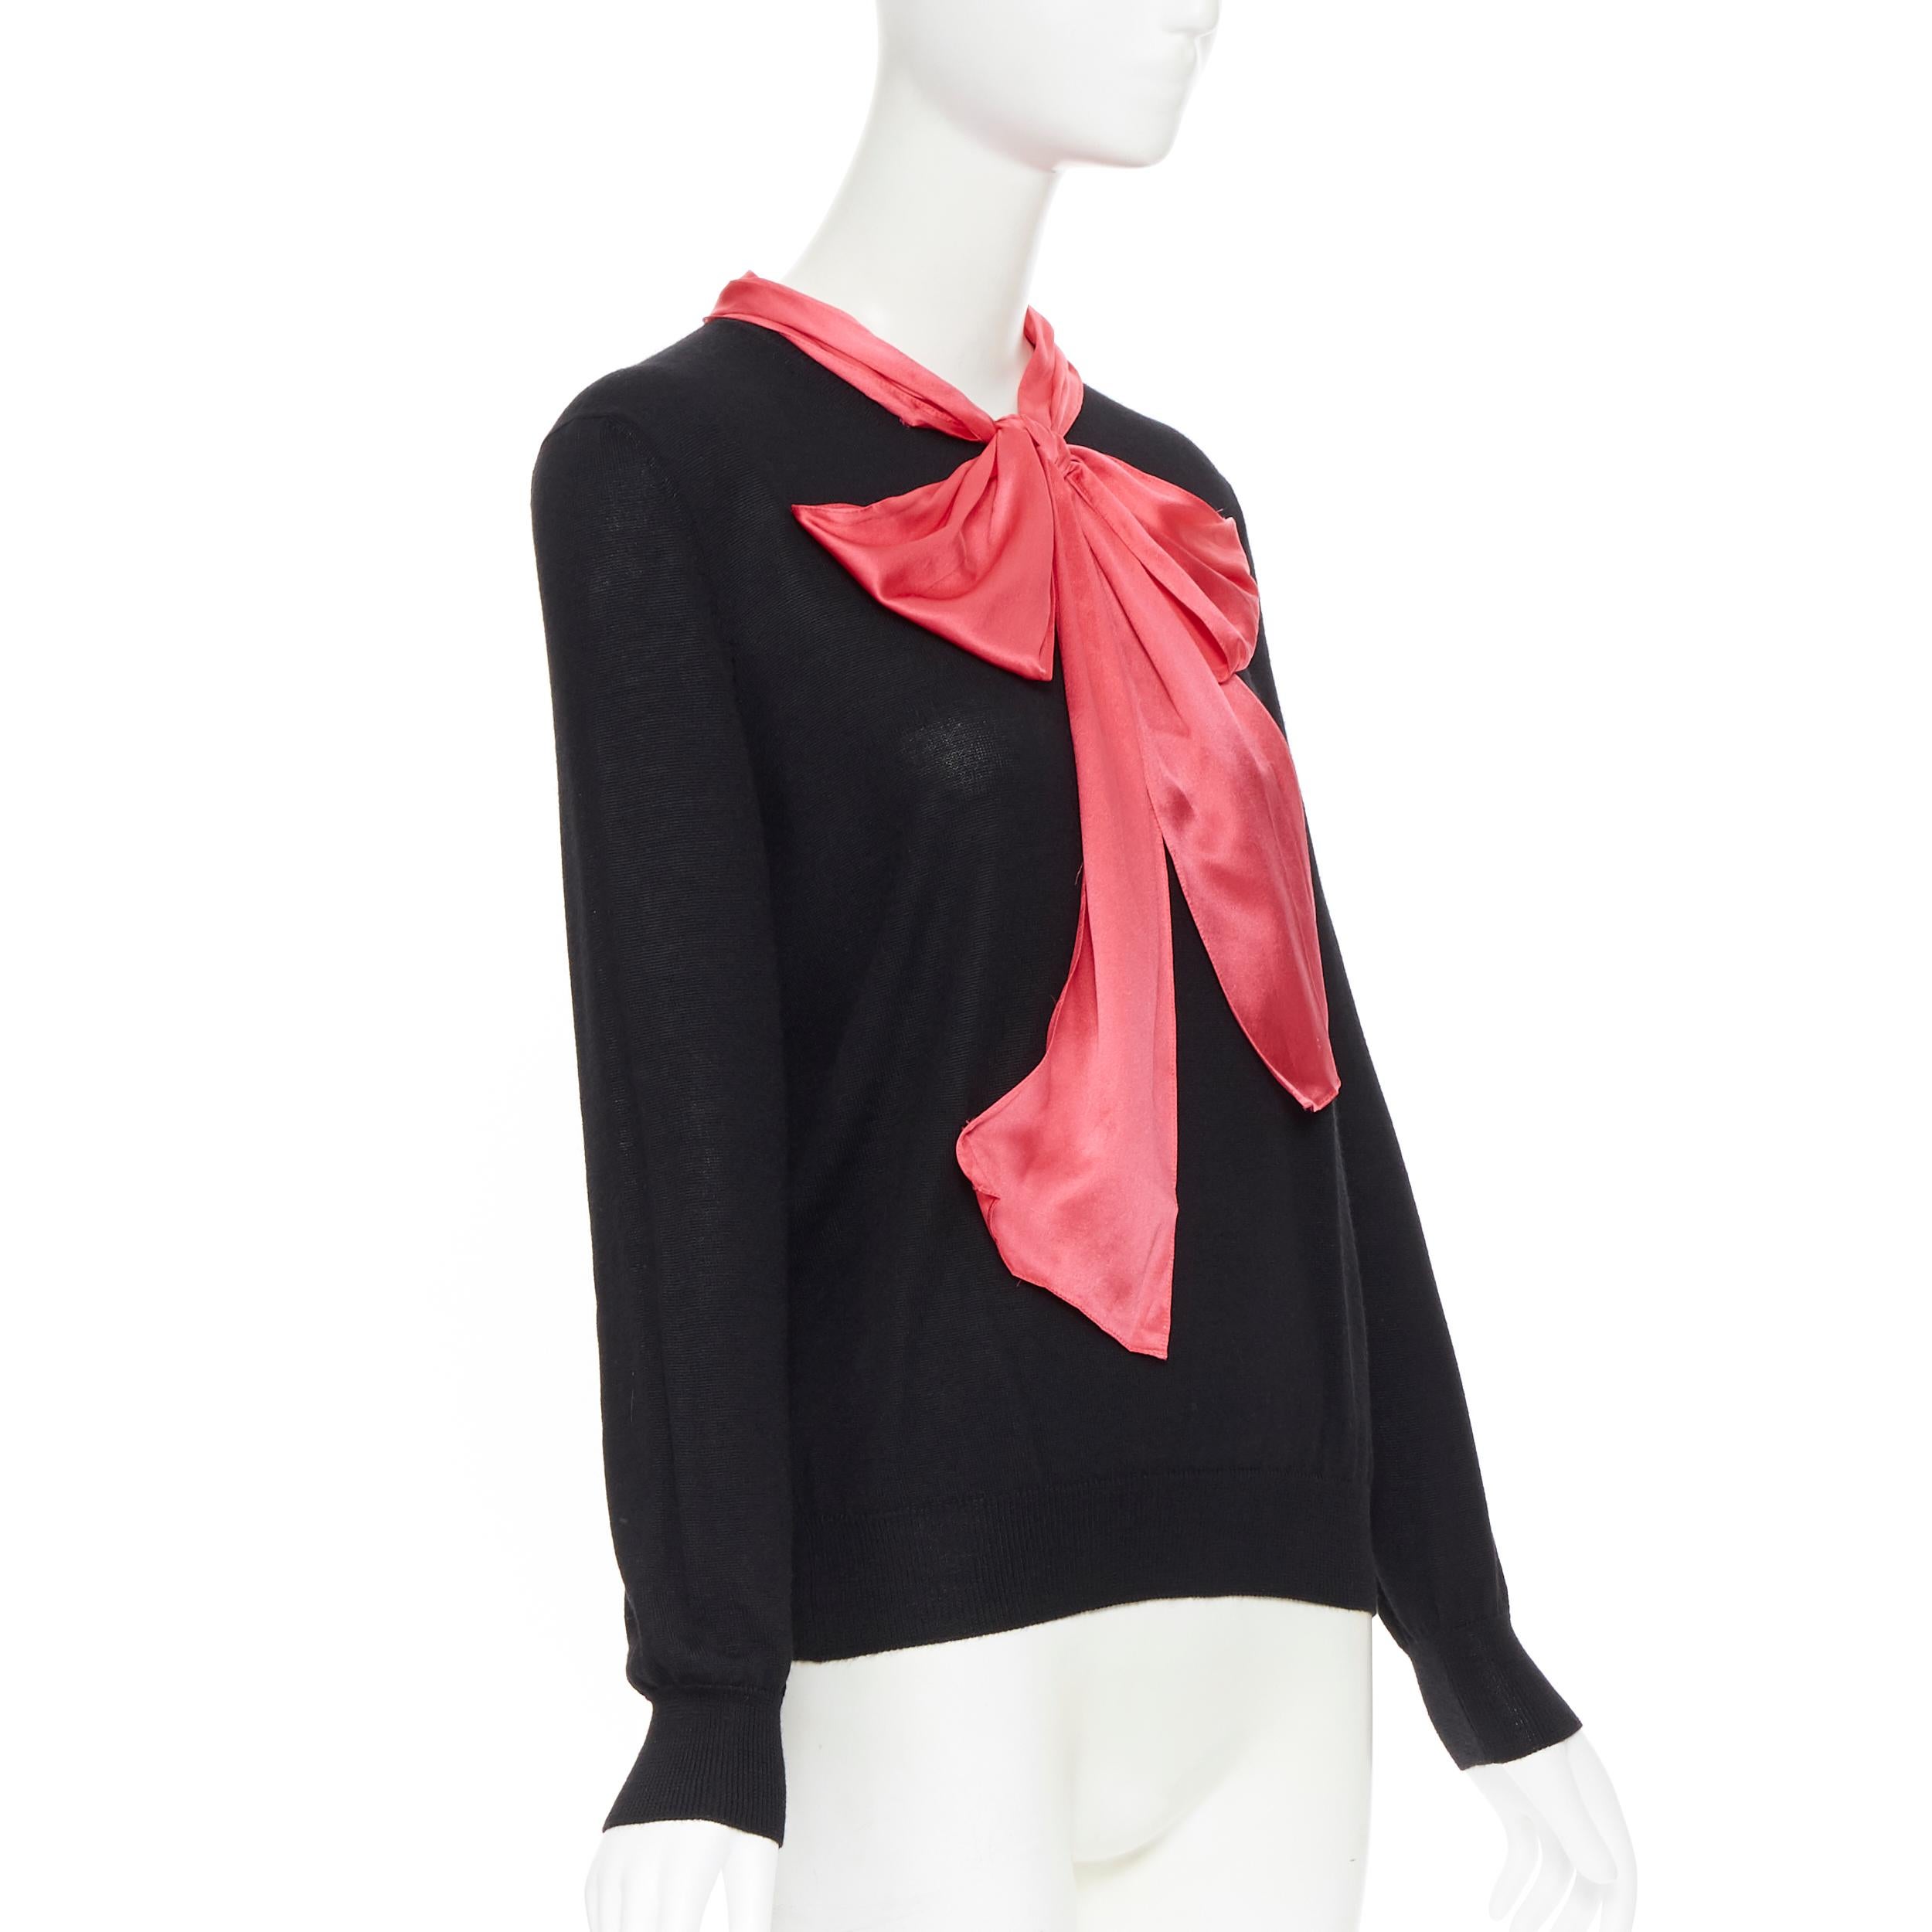 Black GUCCI MICHELE black cashmere blend knit pink silk pussy bow sweater top L